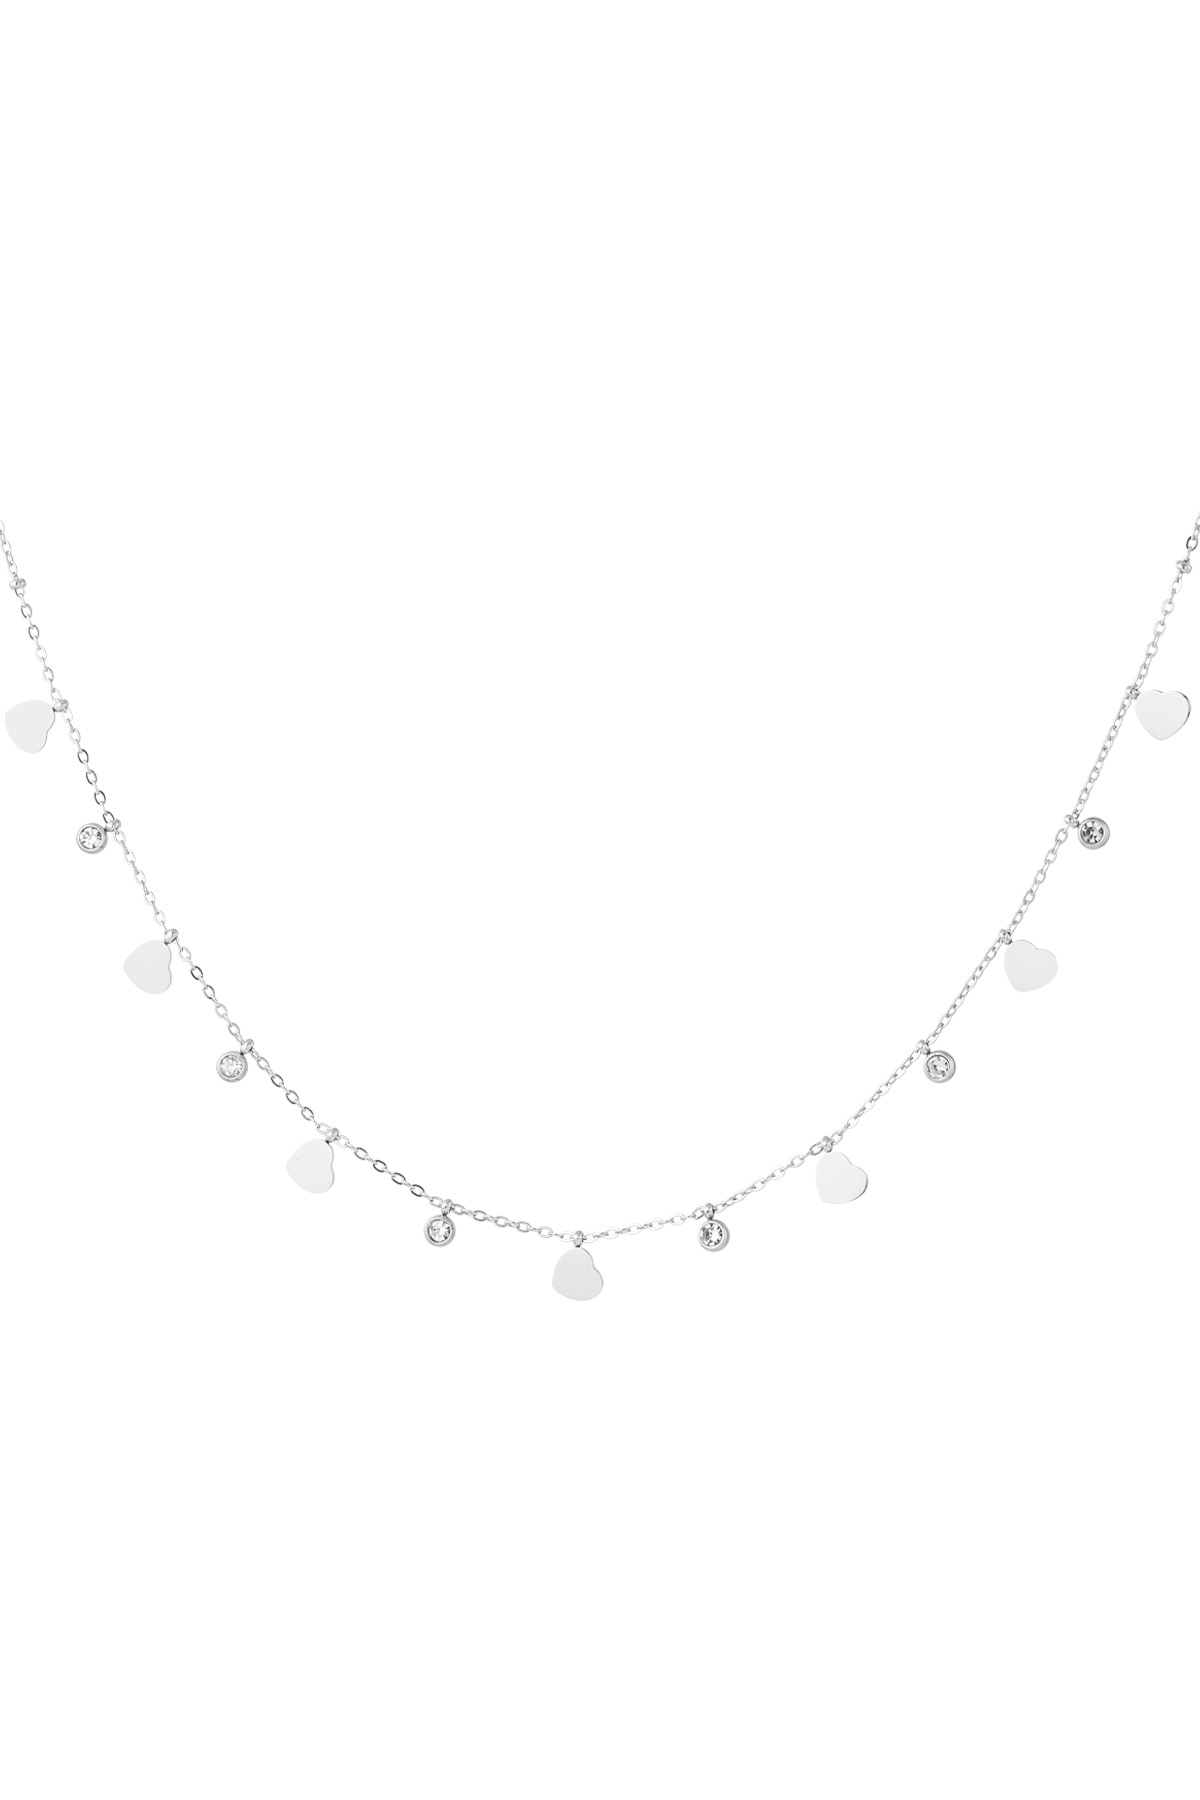 Charm necklace with hearts and diamonds - silver